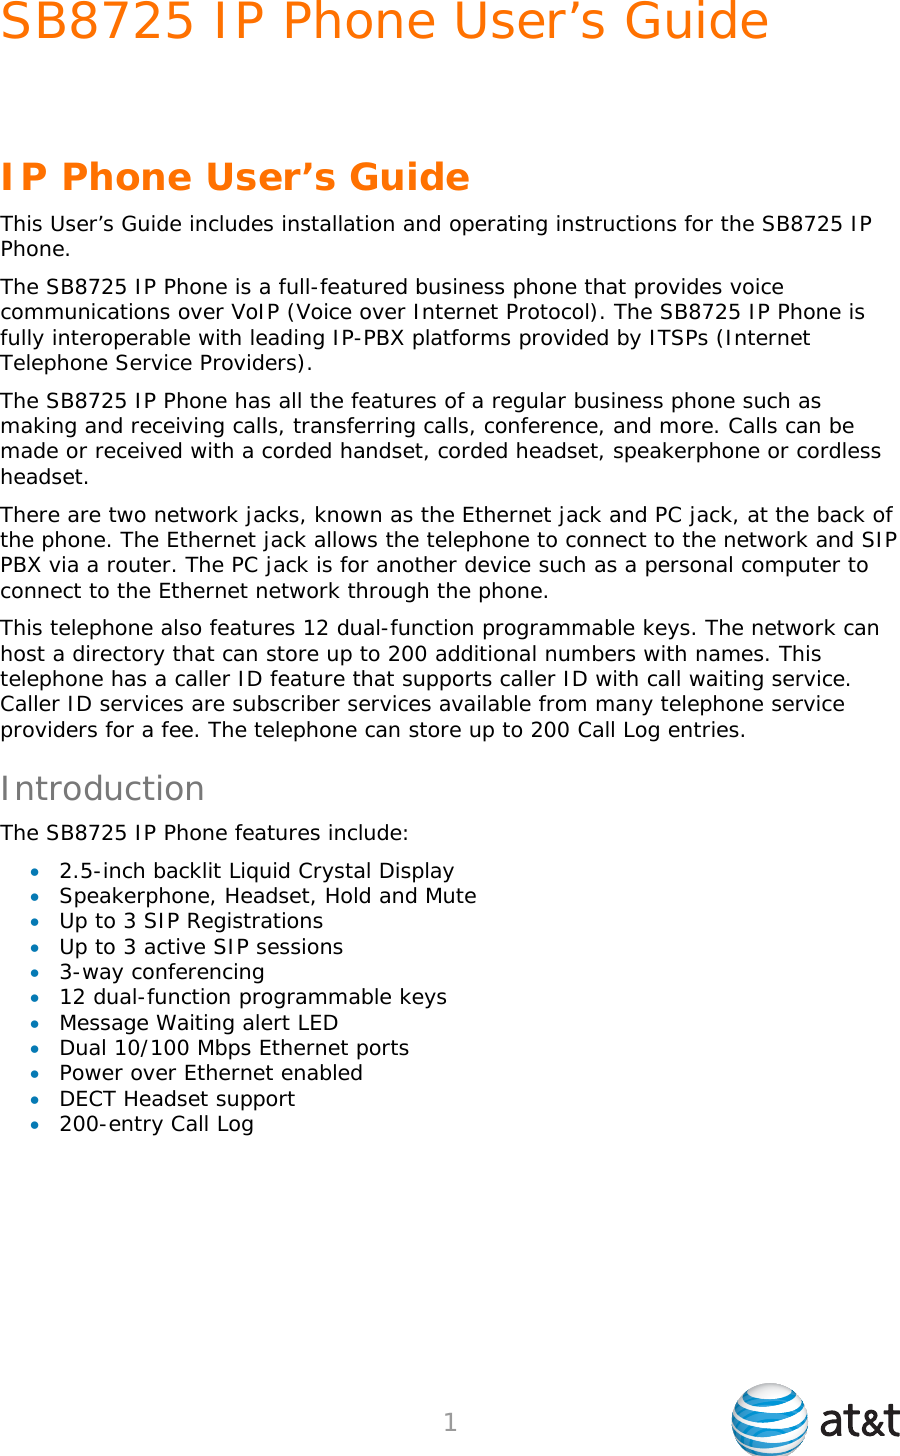 SB8725 IP Phone User’s Guide     1   IP Phone User’s Guide This User’s Guide includes installation and operating instructions for the SB8725 IP Phone. The SB8725 IP Phone is a full-featured business phone that provides voice communications over VoIP (Voice over Internet Protocol). The SB8725 IP Phone is fully interoperable with leading IP-PBX platforms provided by ITSPs (Internet Telephone Service Providers). The SB8725 IP Phone has all the features of a regular business phone such as making and receiving calls, transferring calls, conference, and more. Calls can be made or received with a corded handset, corded headset, speakerphone or cordless headset. There are two network jacks, known as the Ethernet jack and PC jack, at the back of the phone. The Ethernet jack allows the telephone to connect to the network and SIP PBX via a router. The PC jack is for another device such as a personal computer to connect to the Ethernet network through the phone. This telephone also features 12 dual-function programmable keys. The network can host a directory that can store up to 200 additional numbers with names. This telephone has a caller ID feature that supports caller ID with call waiting service. Caller ID services are subscriber services available from many telephone service providers for a fee. The telephone can store up to 200 Call Log entries. Introduction The SB8725 IP Phone features include:  2.5-inch backlit Liquid Crystal Display  Speakerphone, Headset, Hold and Mute  Up to 3 SIP Registrations  Up to 3 active SIP sessions  3-way conferencing  12 dual-function programmable keys  Message Waiting alert LED  Dual 10/100 Mbps Ethernet ports  Power over Ethernet enabled  DECT Headset support  200-entry Call Log 